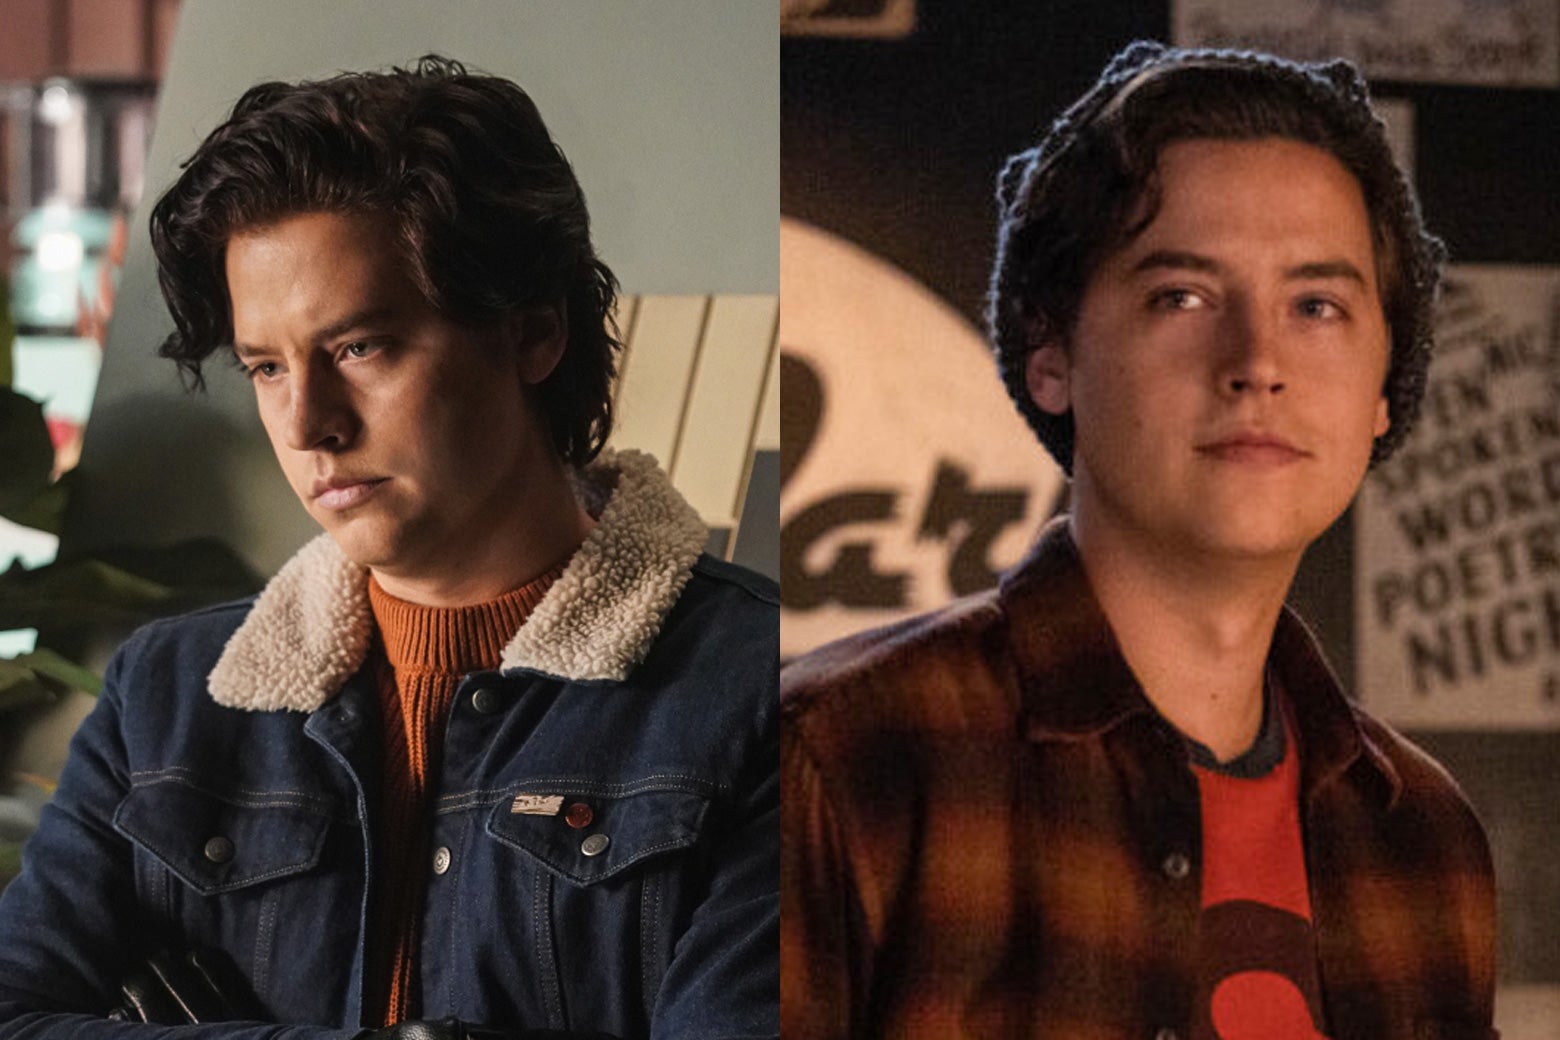 Before-and-after of Jughead.